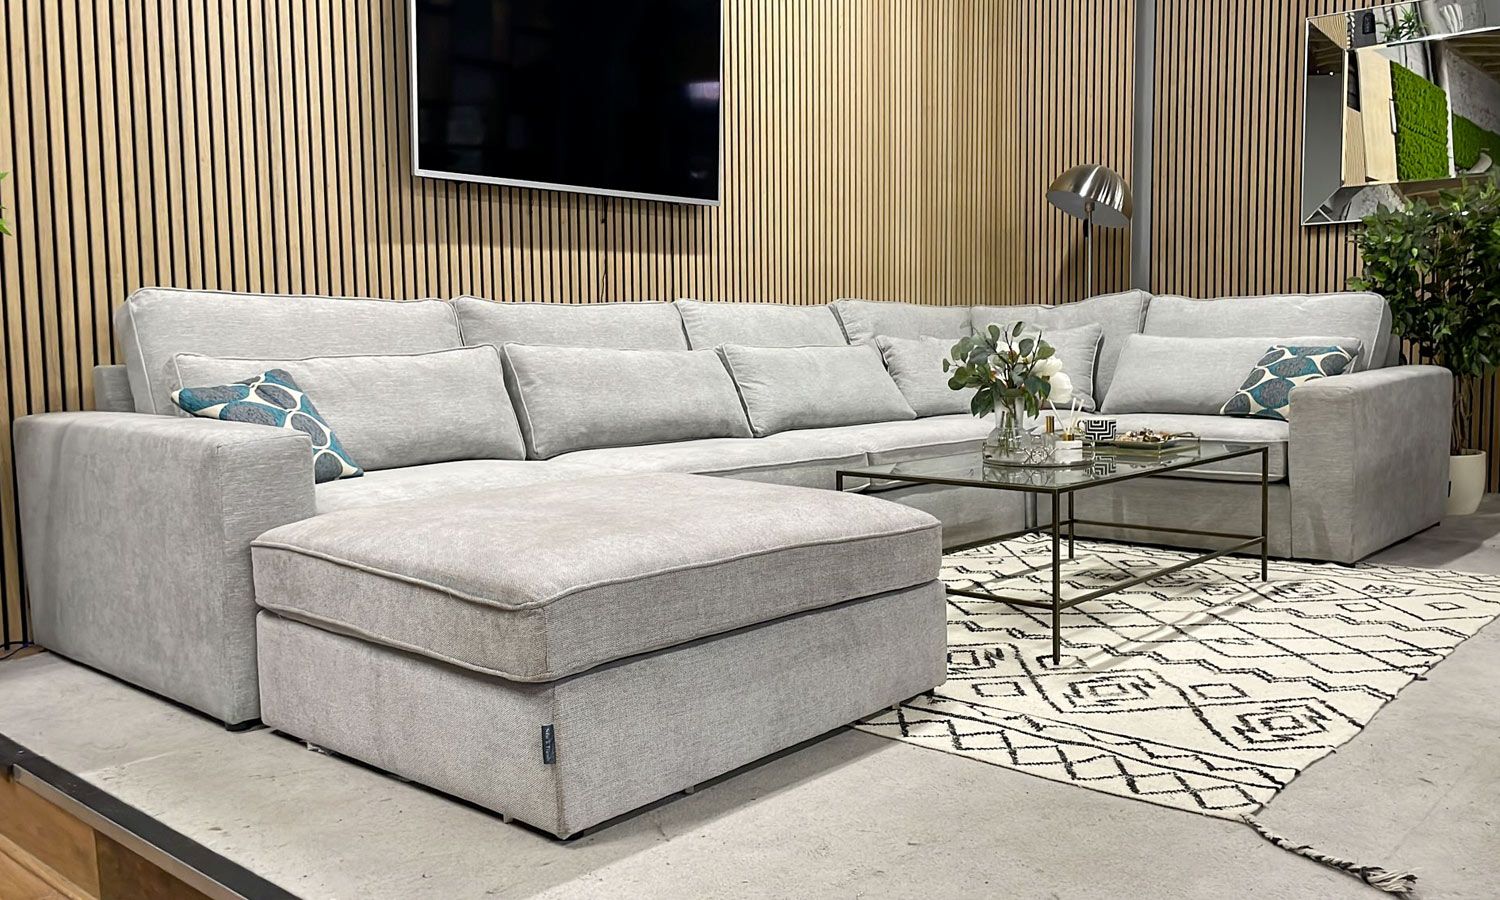 Navagio Light Grey Ascot Fabric U Shaped Sofa – Sofas & Friends Throughout Sofas In Light Gray (View 6 of 15)